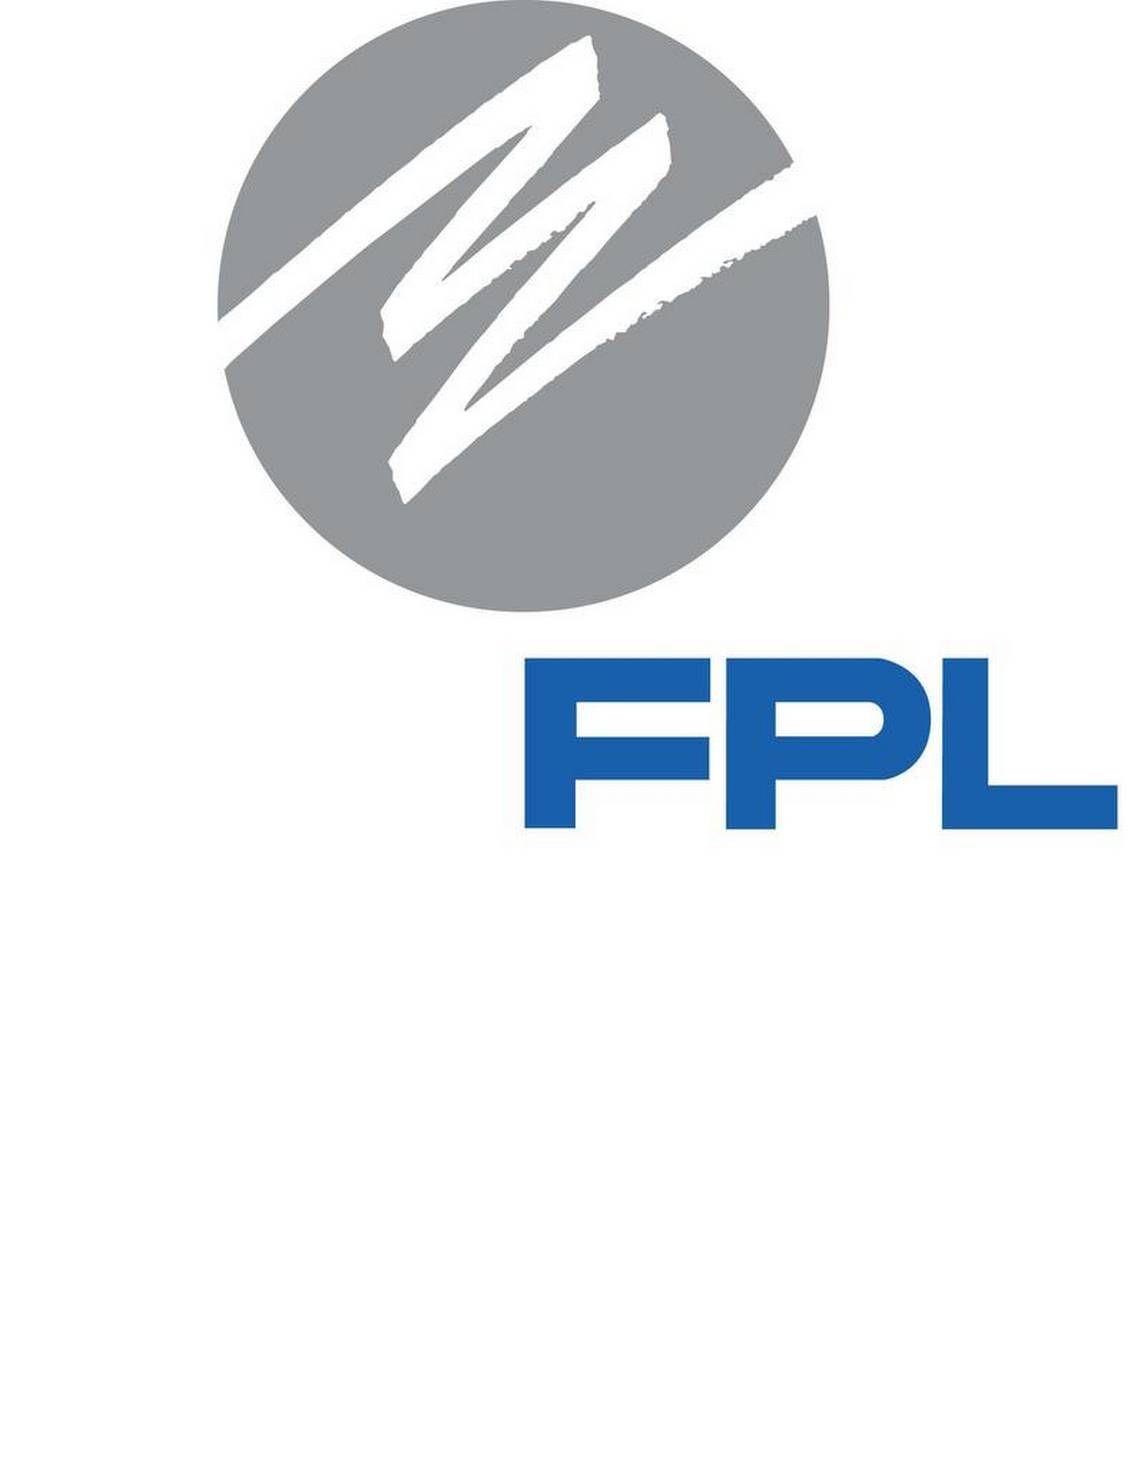 FPL Logo - FPL customers to pay for costs of responding to Hurricane Matthew